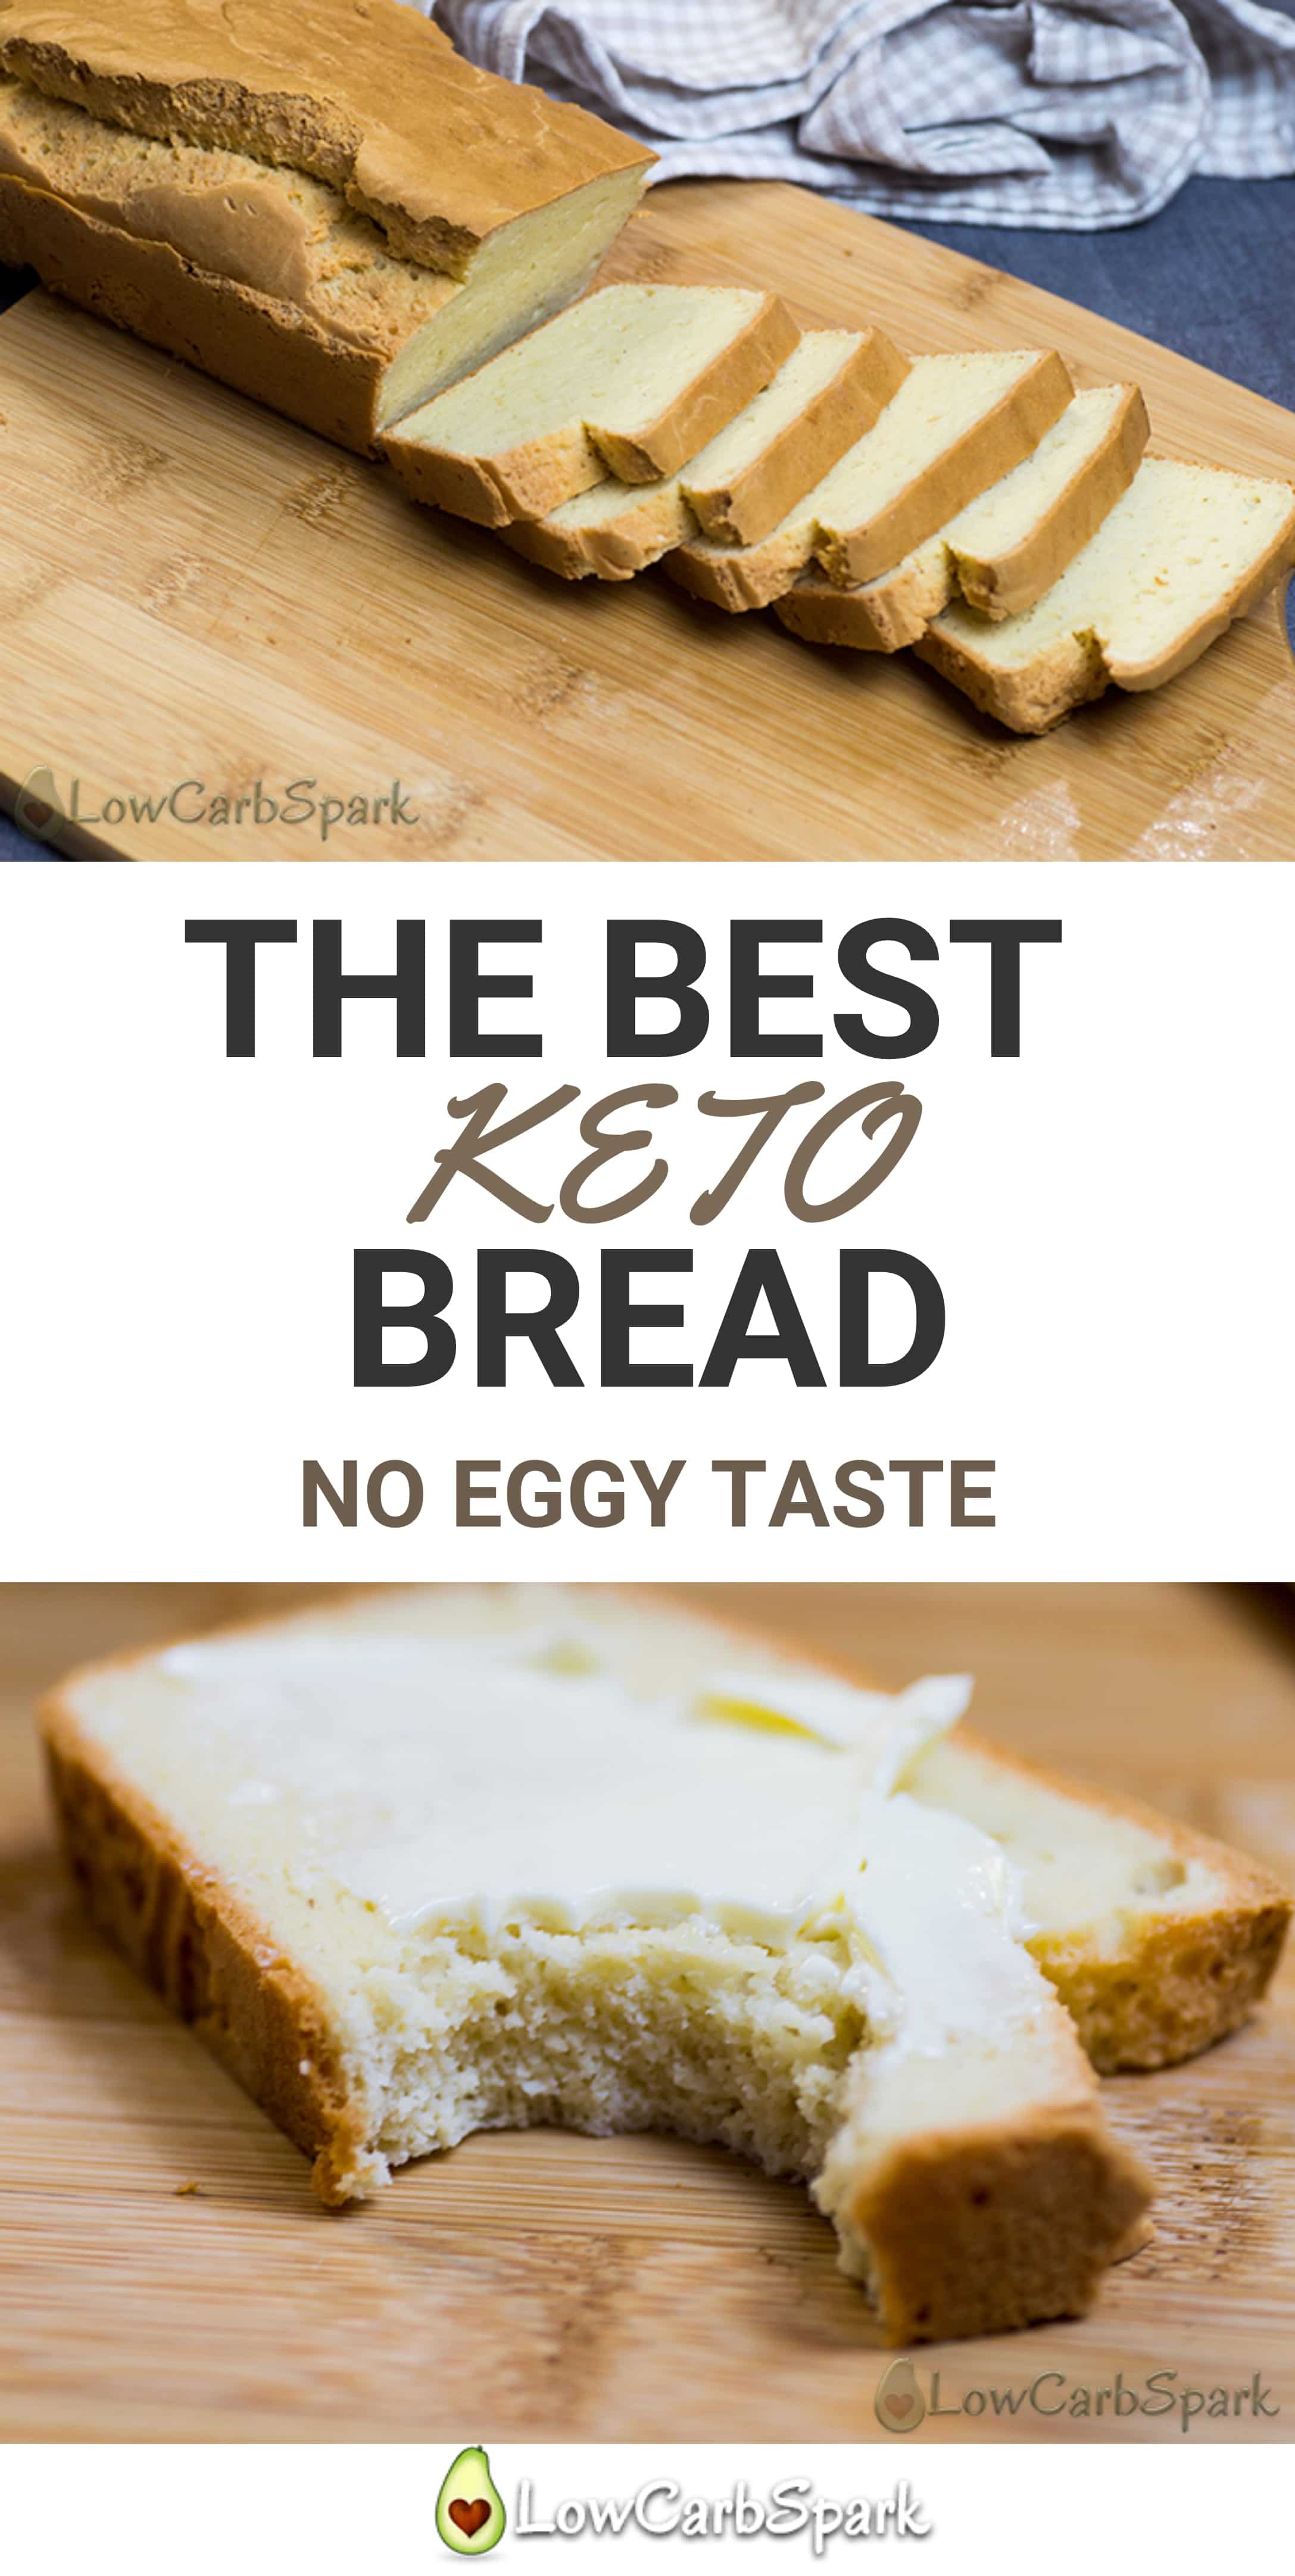 The Best Keto Bread - Tasty Low Carb Bread - No Eggy Taste